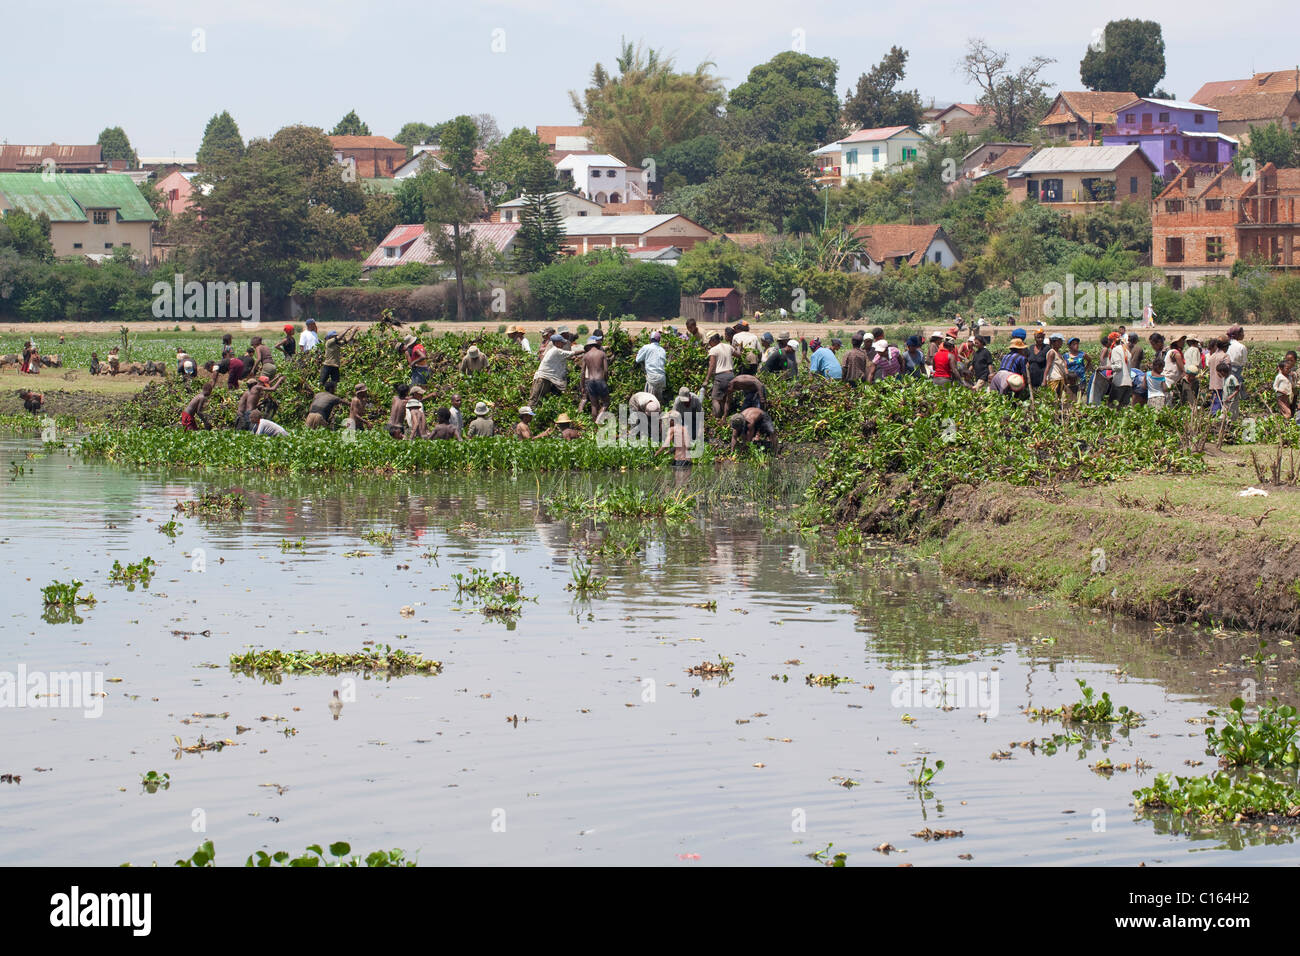 Malagasy Villagers gather introduced and invasive Water Hyacinth (Eichhornia crasspipes) from a community pond. Madagascar. Stock Photo